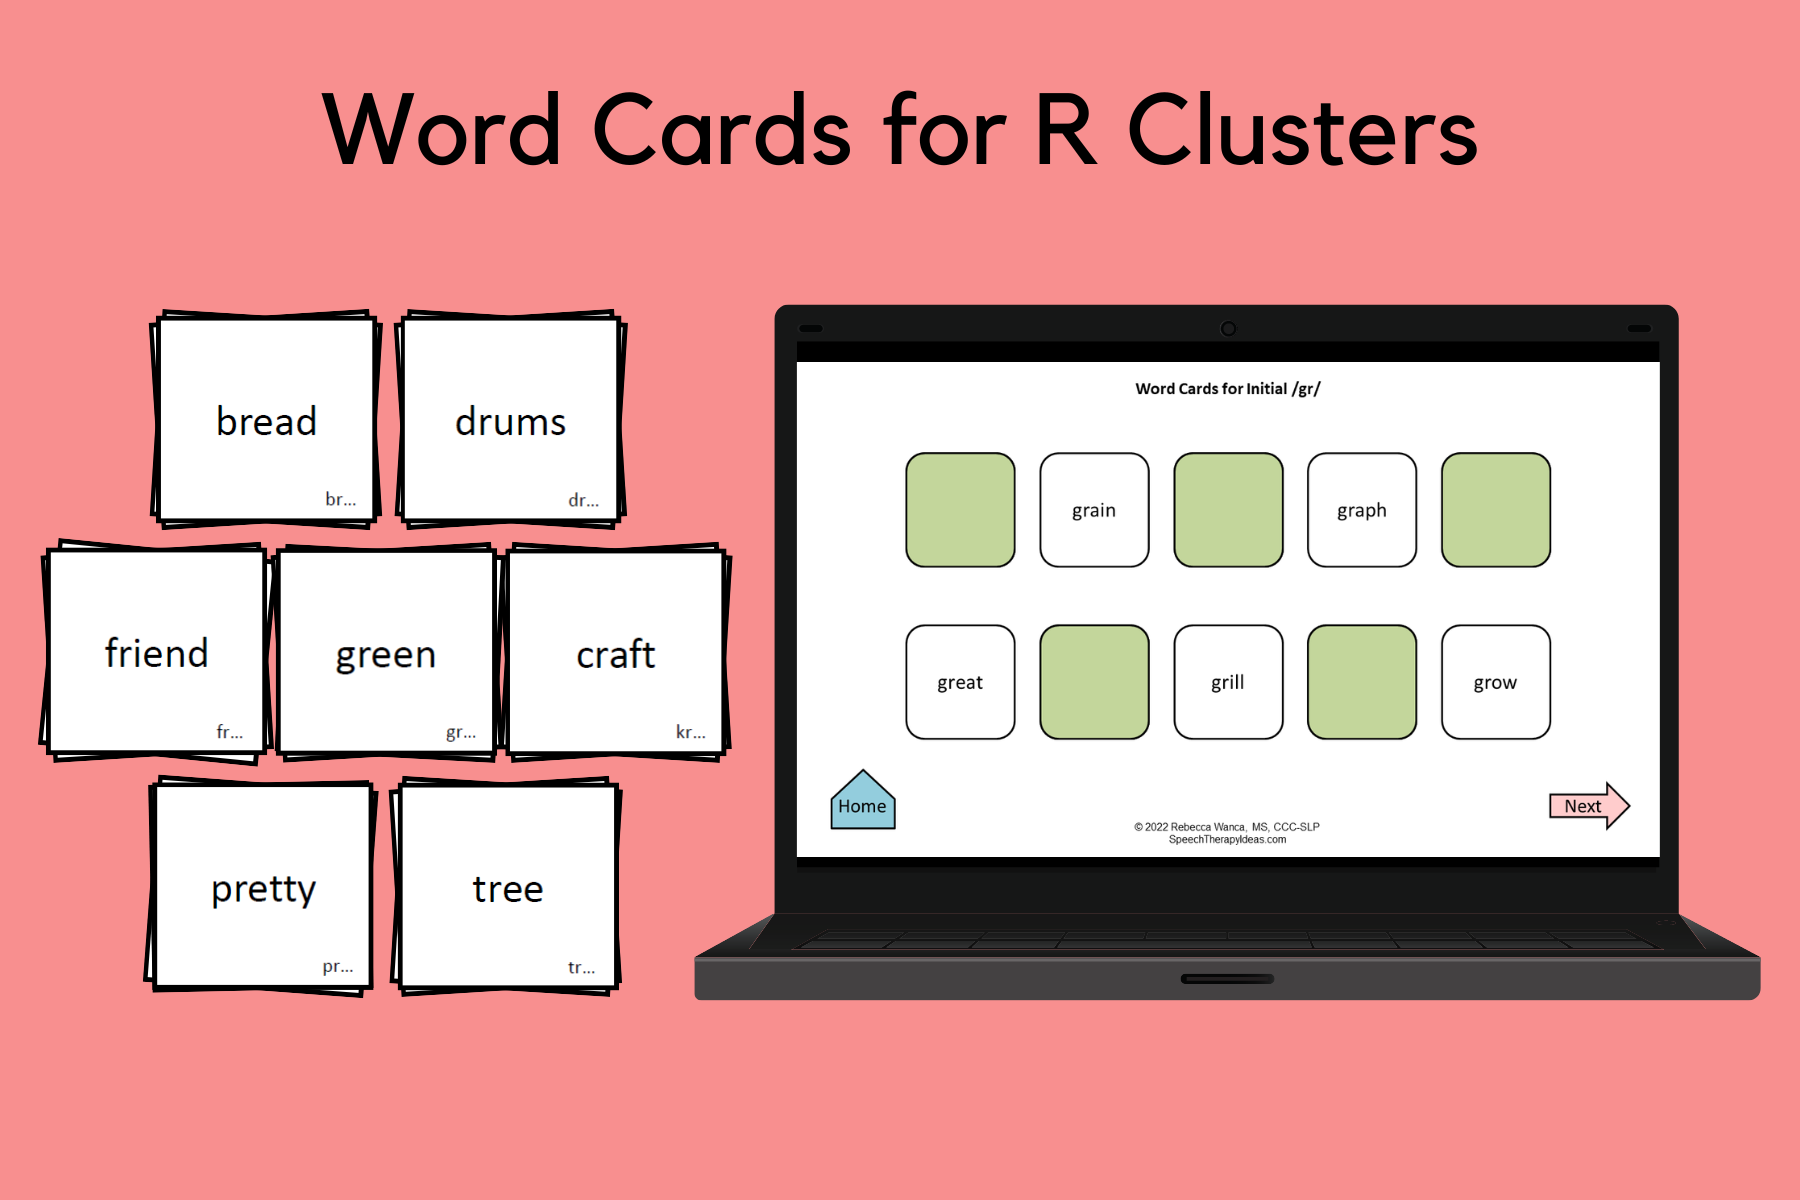 Word Cards for R Clusters